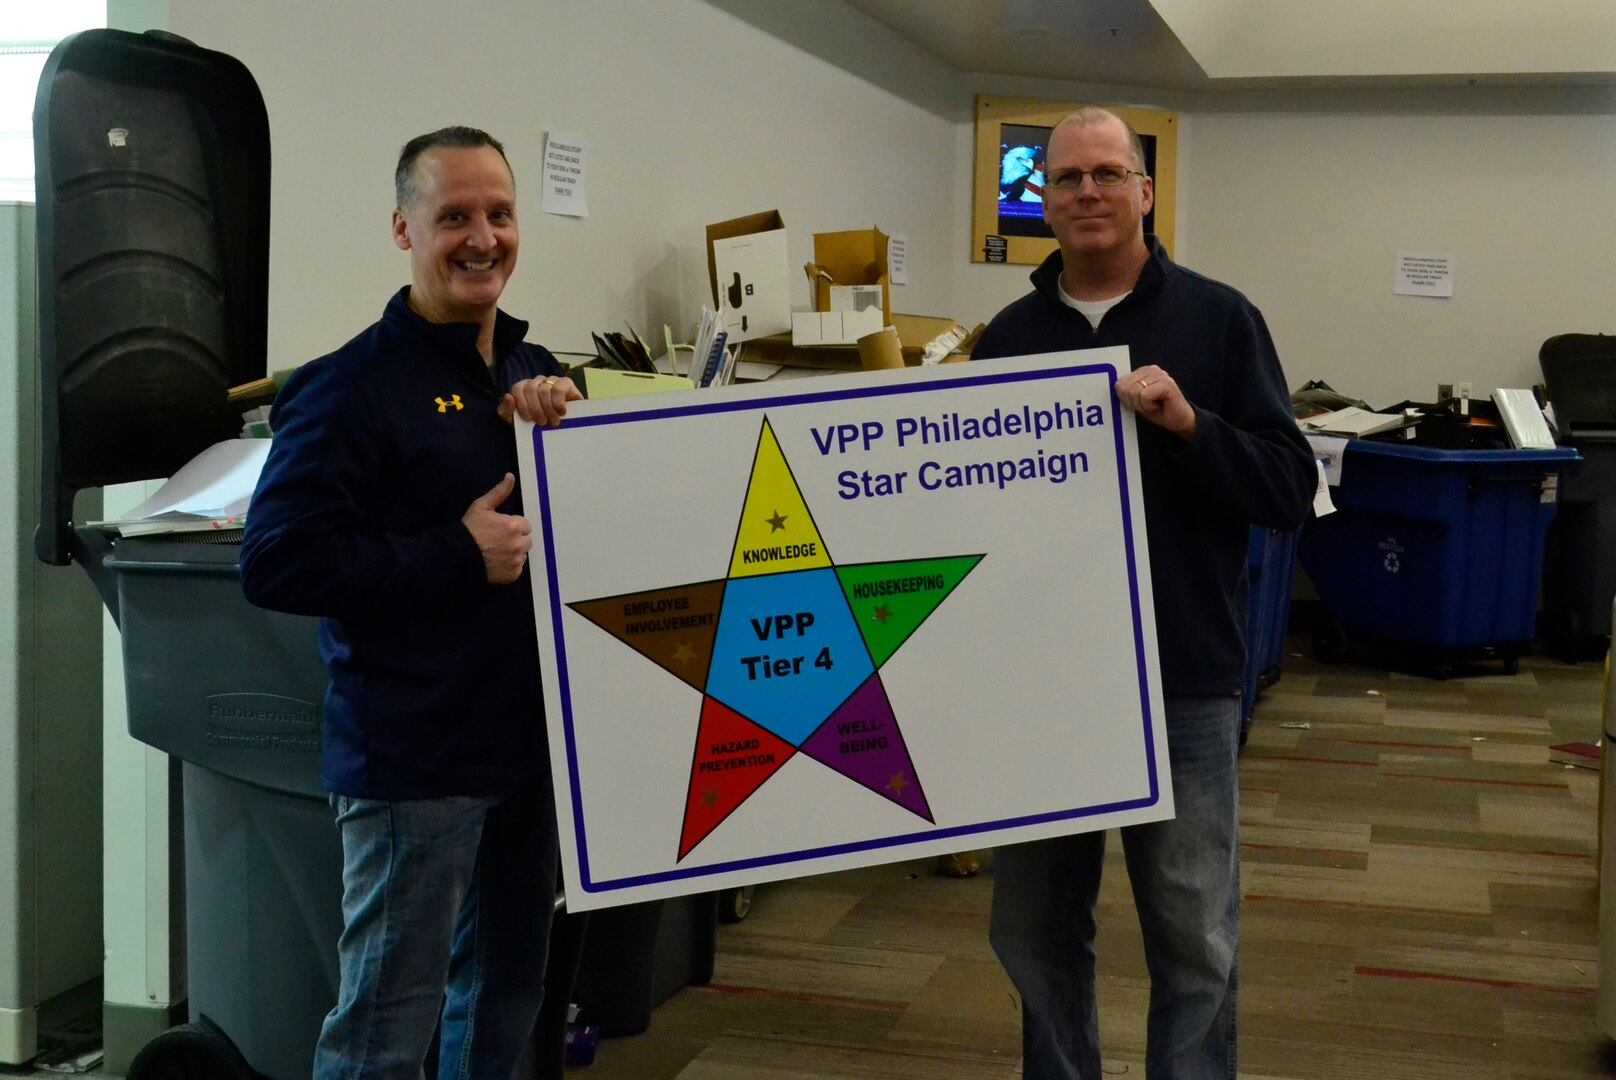 Navy Capt. Gerald Raia, (left), Construction and Equipment supply chain director, and Tom Grace, (right) Construction and Equipment deputy director hold the VPP Star campaign placard during the spring clean-up event in Building 3 March 20, 2019 in Philadelphia. The leaders implemented a supply chain wide housekeeping event to demonstrate the directorate’s commitment to the VPP program, an OSHA led initiative that promotes good housekeeping in the office environment as a major part of its mishap, pest management and fire prevention efforts. (Photo by Alexandria Brimage-Gray).